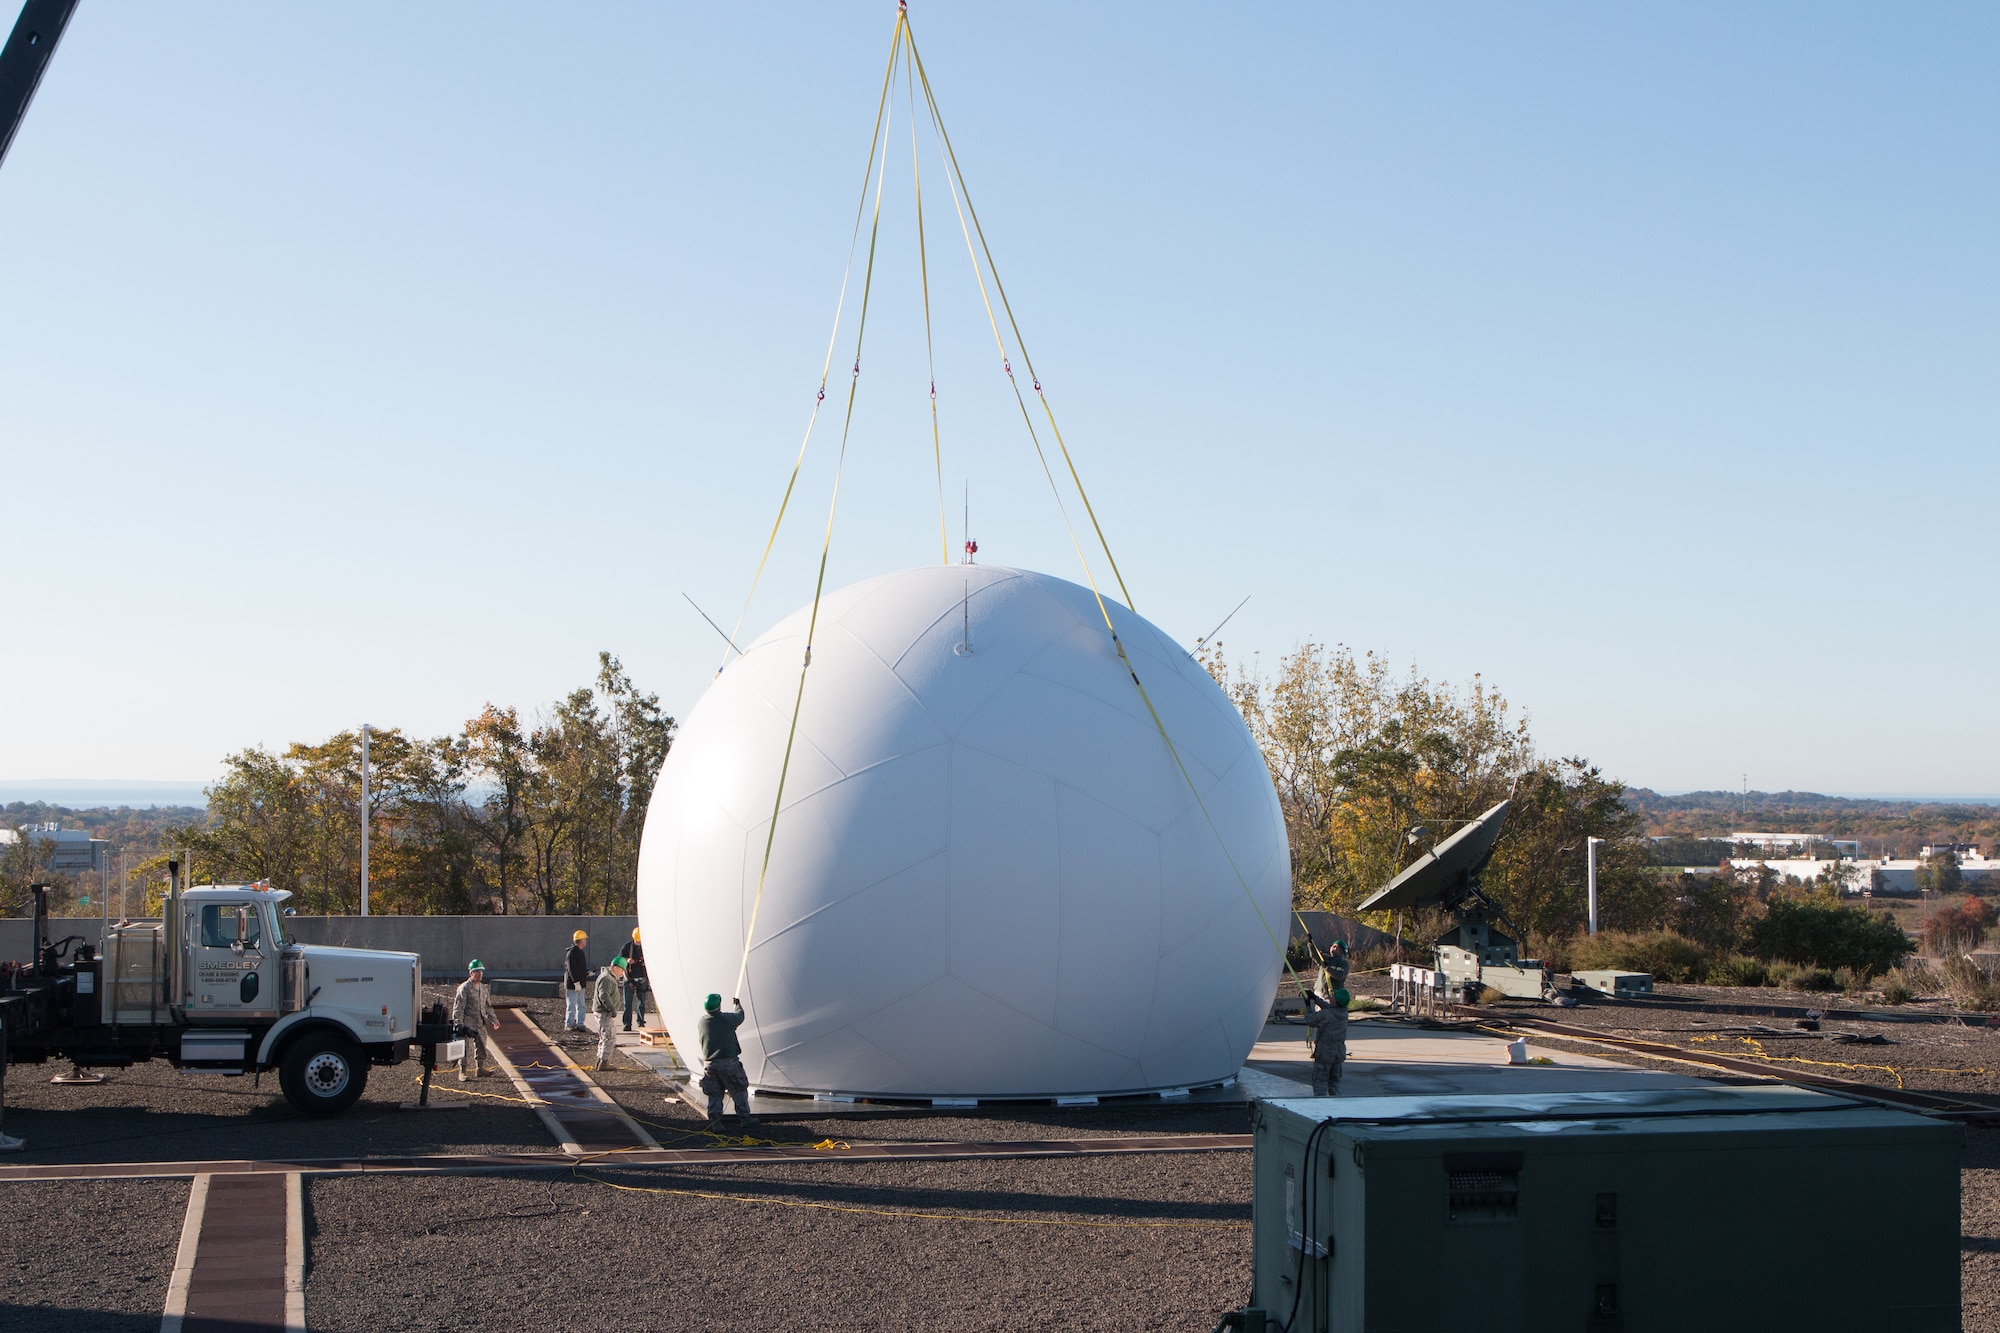 Airmen from the 103rd Air Control Squadron raise a fiber composite radome to the top of the radar tower at the Orange Air National Guard Station, Orange, Conn., Oct. 25, 2014.  The maintenance free radome, which gets its name from a blend of the words radar and dome, is a protective shield that encompasses a radar antenna eliminating the need to fold and protect the $2 million antenna within from possible wind damage during severe weather.  (Photo courtesy of Senior Master Sgt. Keith Haessly)